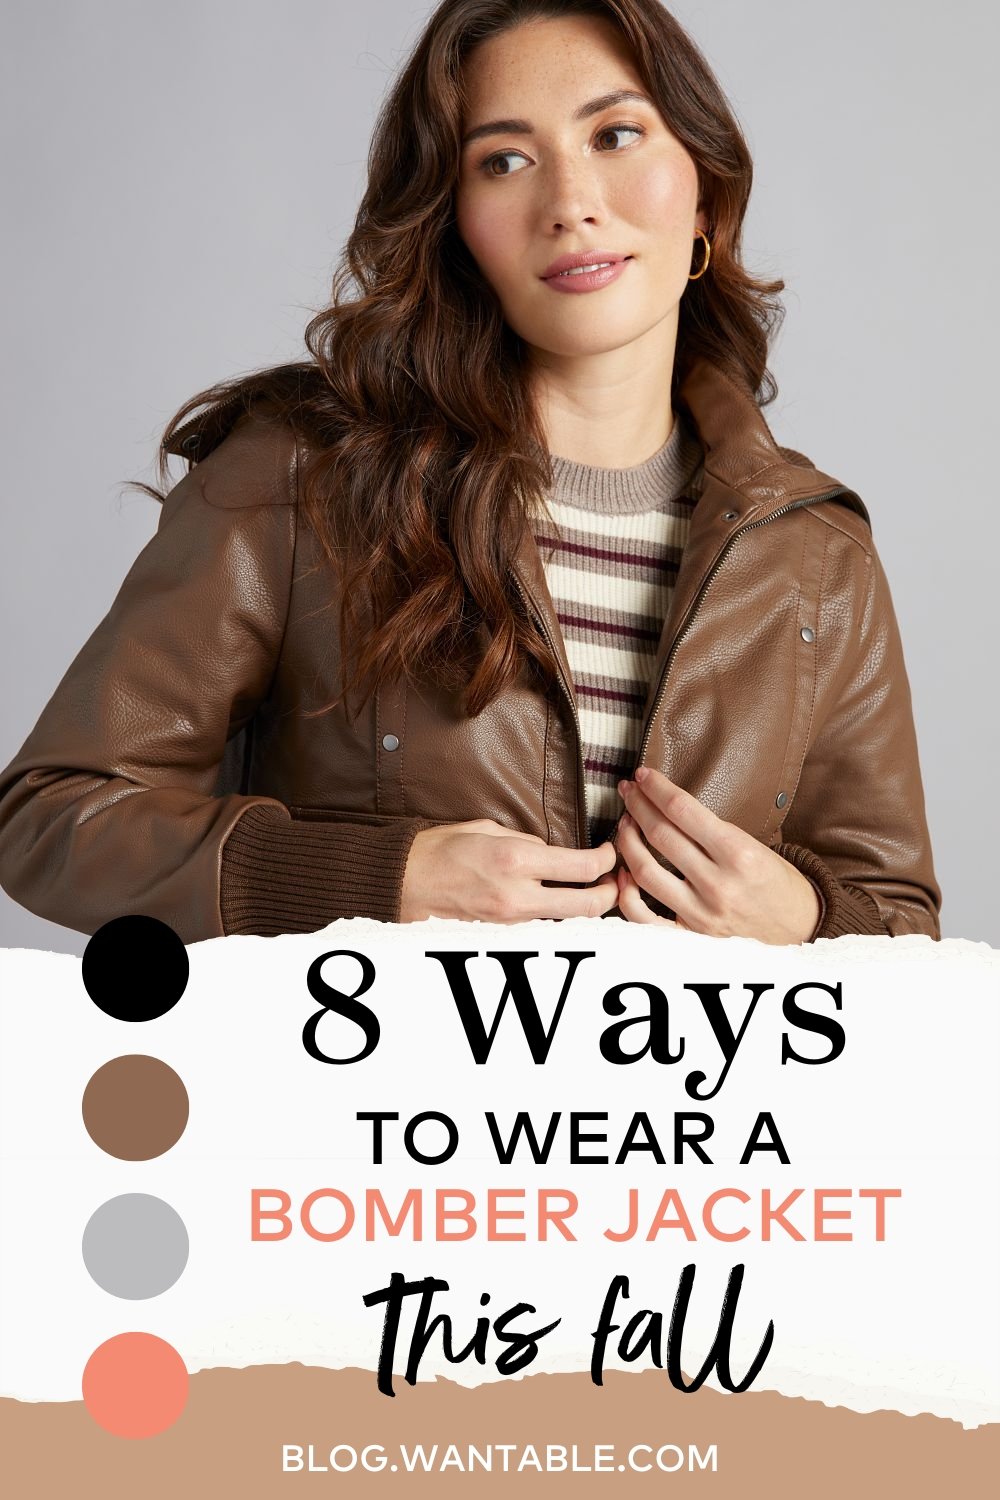 Pinterest image for how to style a bomber jacket.